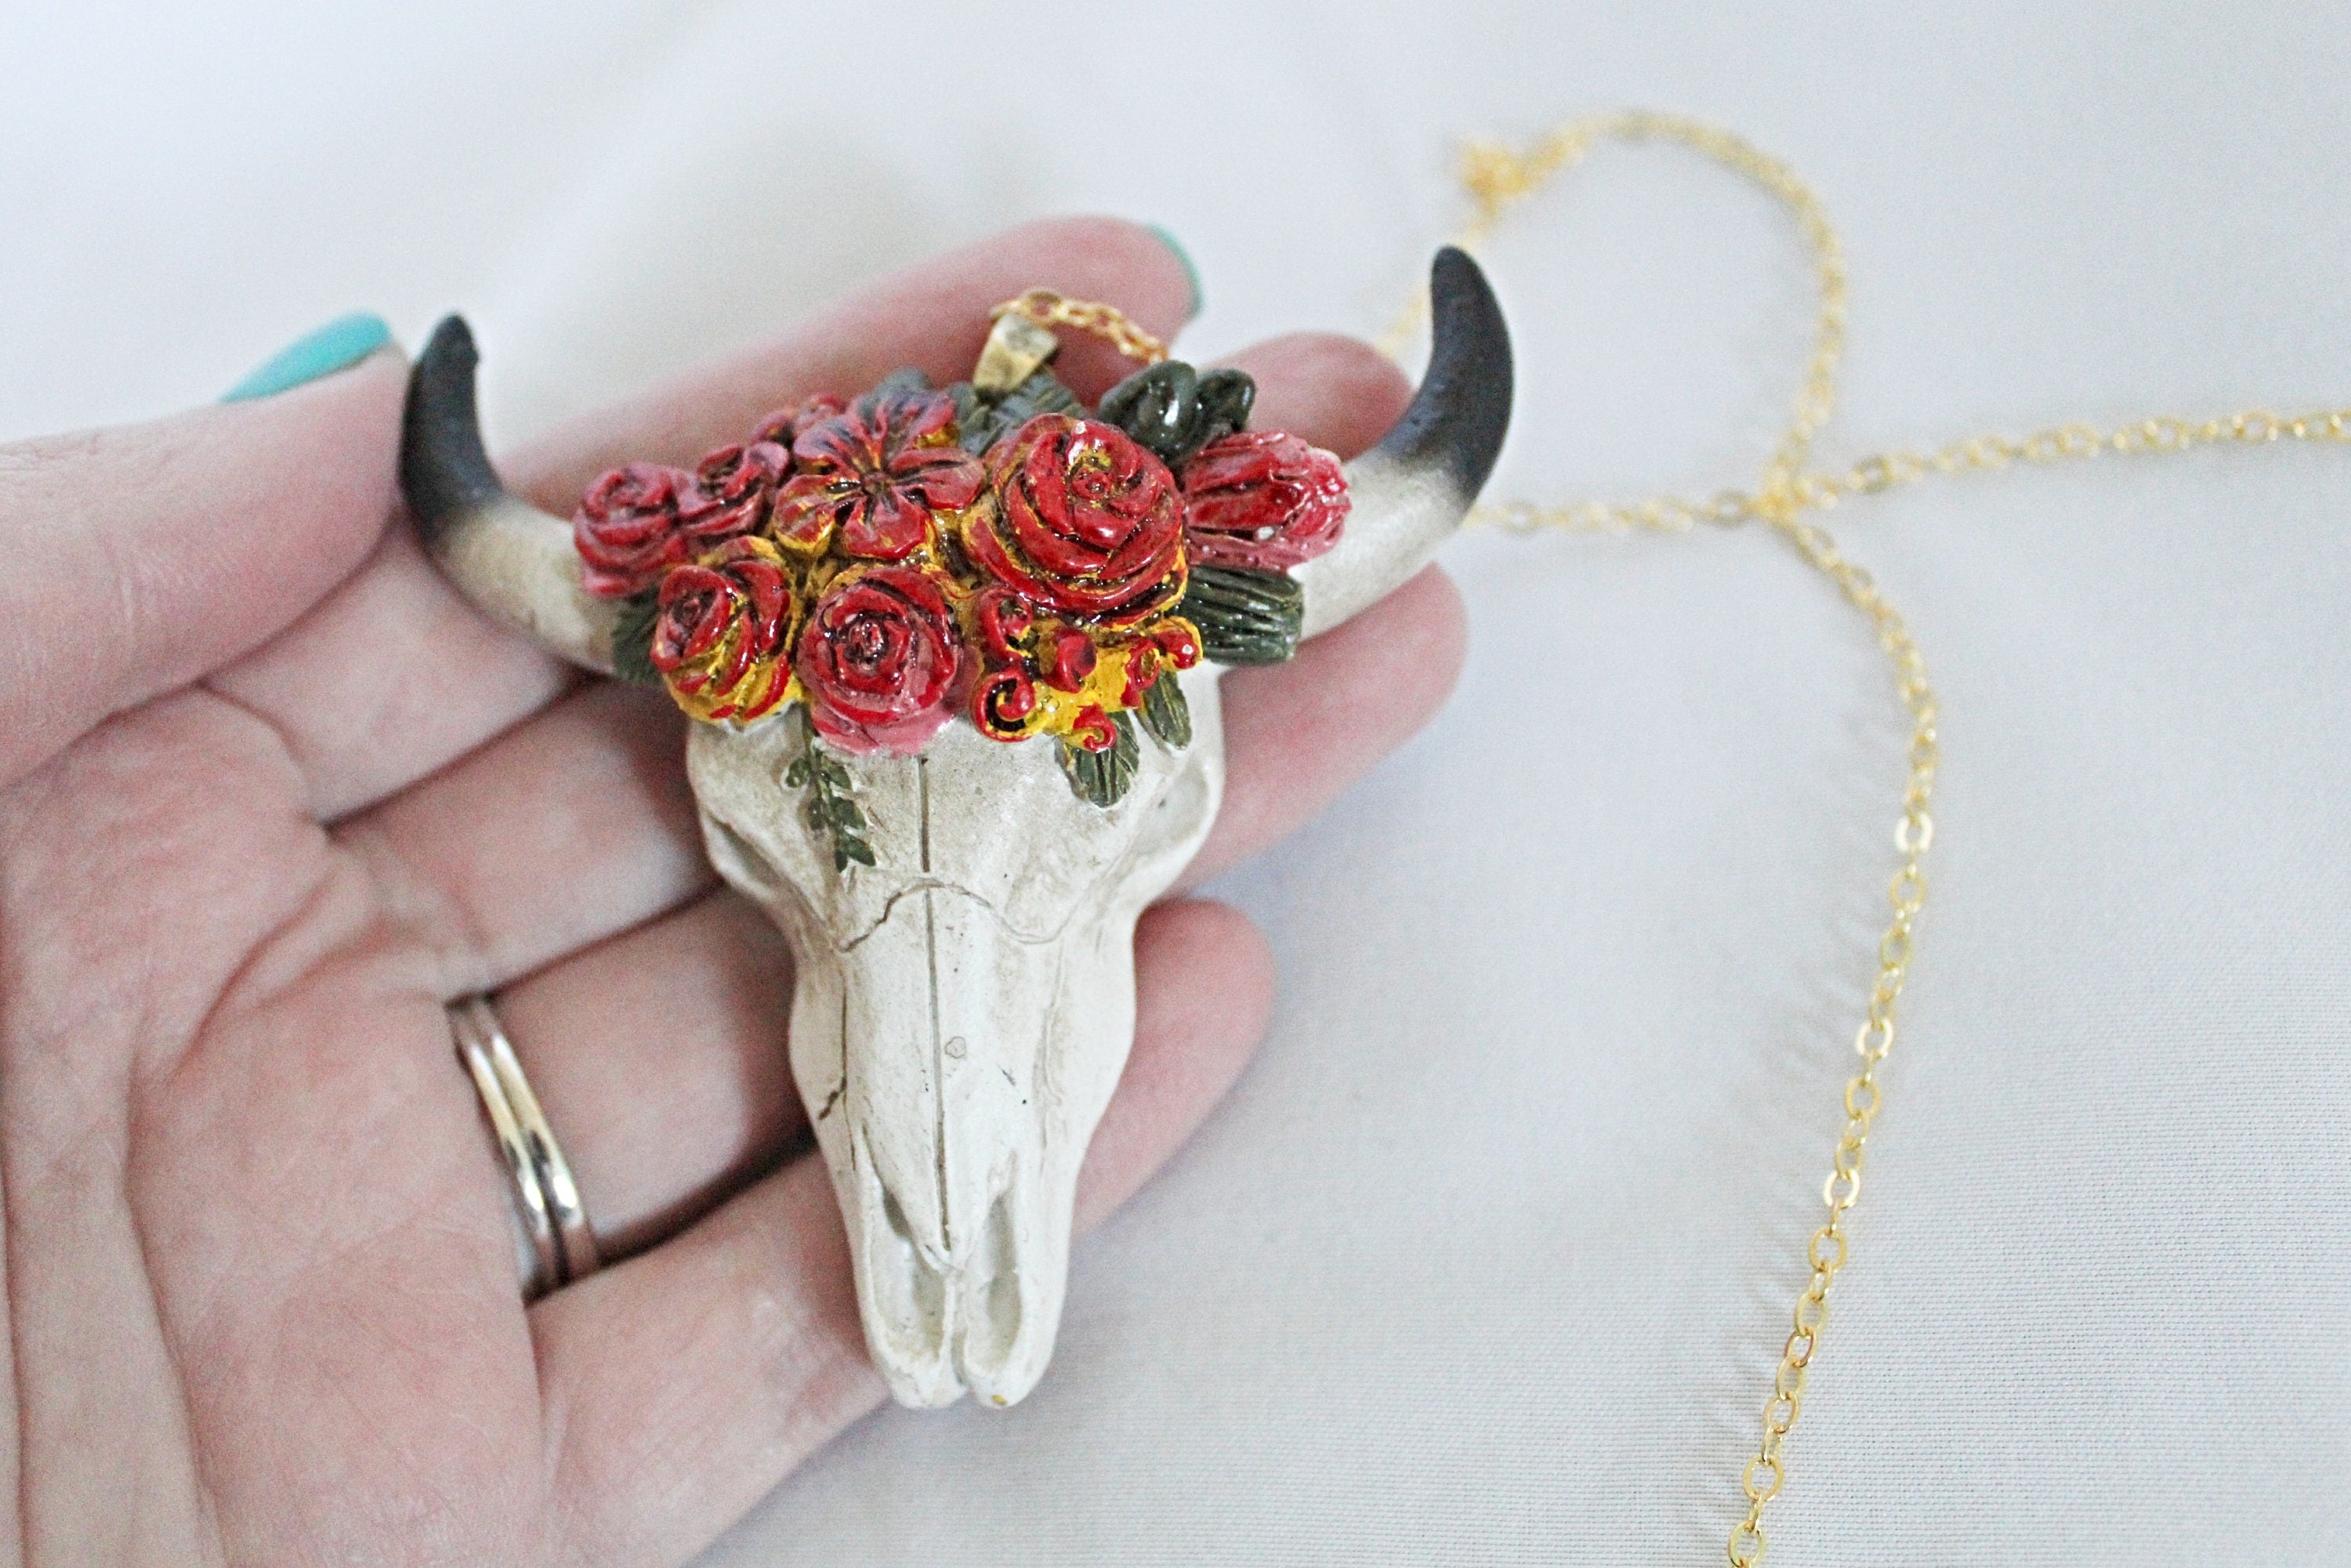 Bull Skull Necklace Steer Skull Jewelry Cow Skull Charm Necklace Western  Jewelry Native American Jewelry Longhorn Skull Hatchet Necklace | Wish